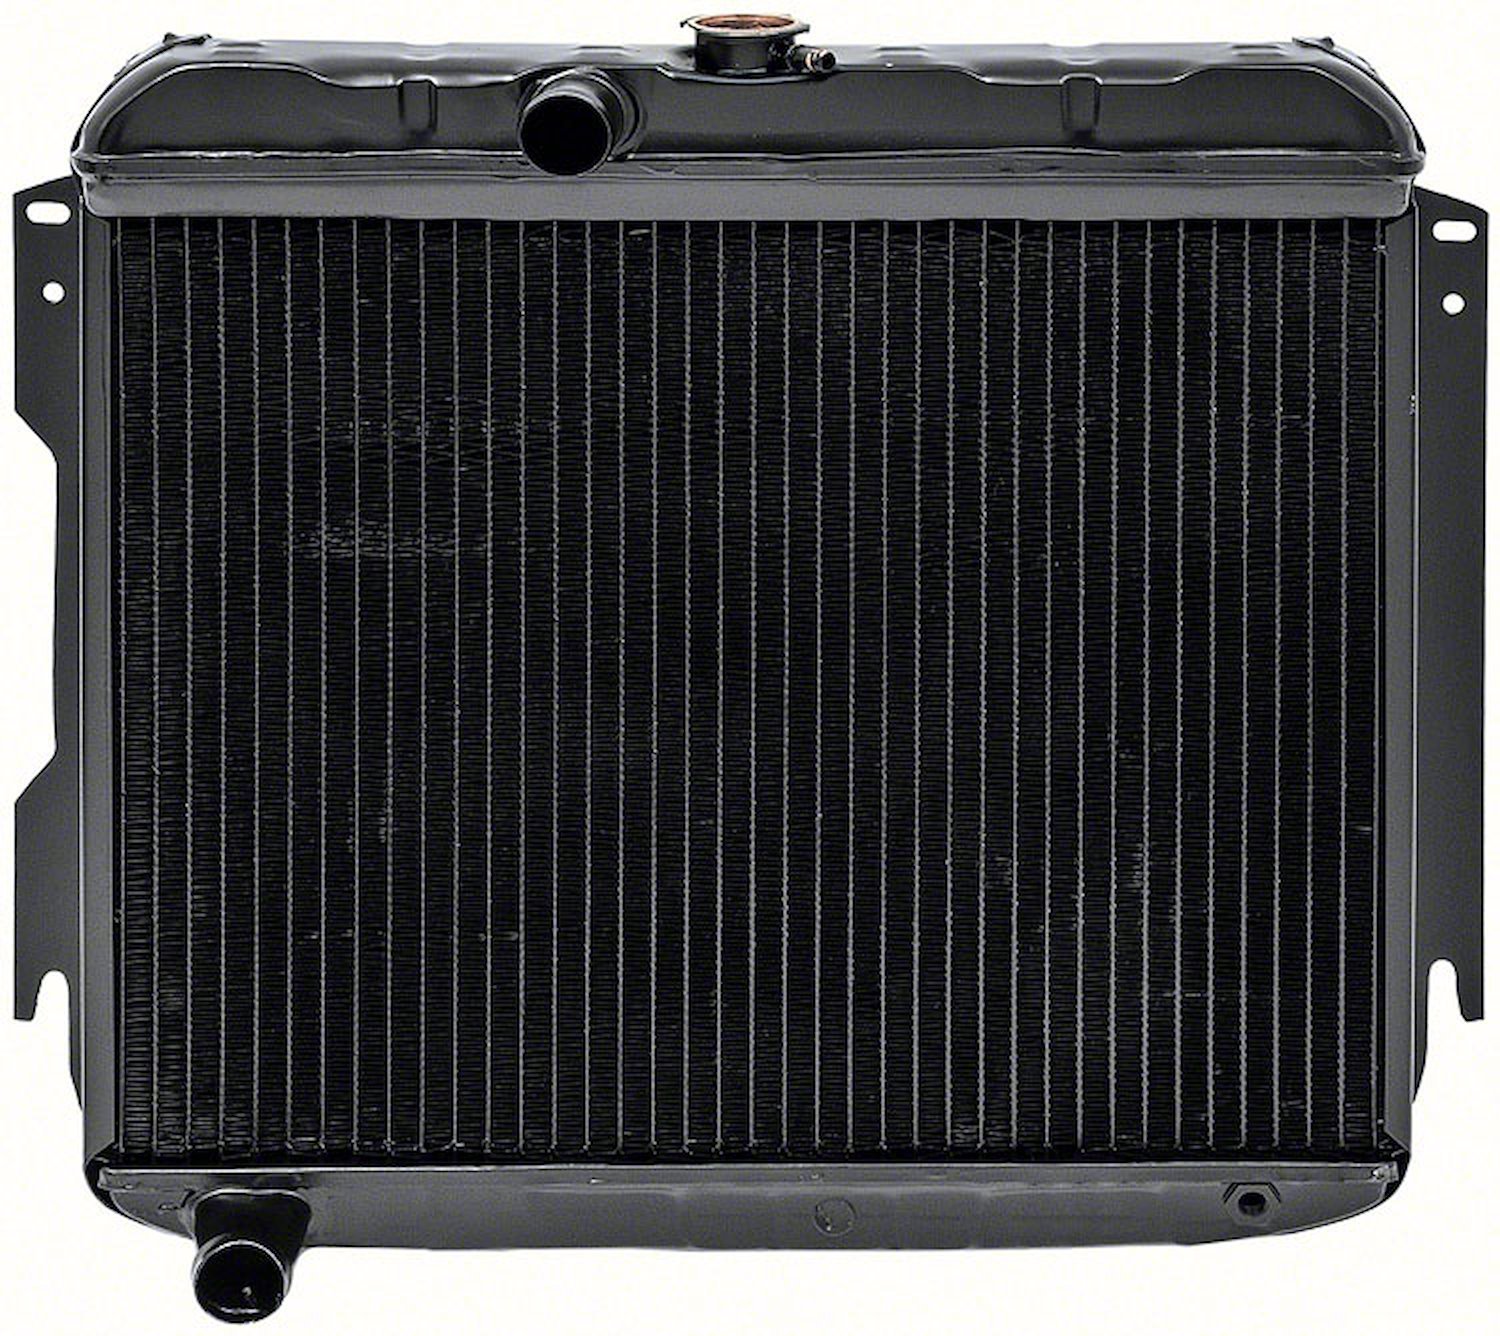 MB2364S Replacement Radiator 1963-64 Dodge B-Body V8 361/383/426 With Standard Trans 3 Row